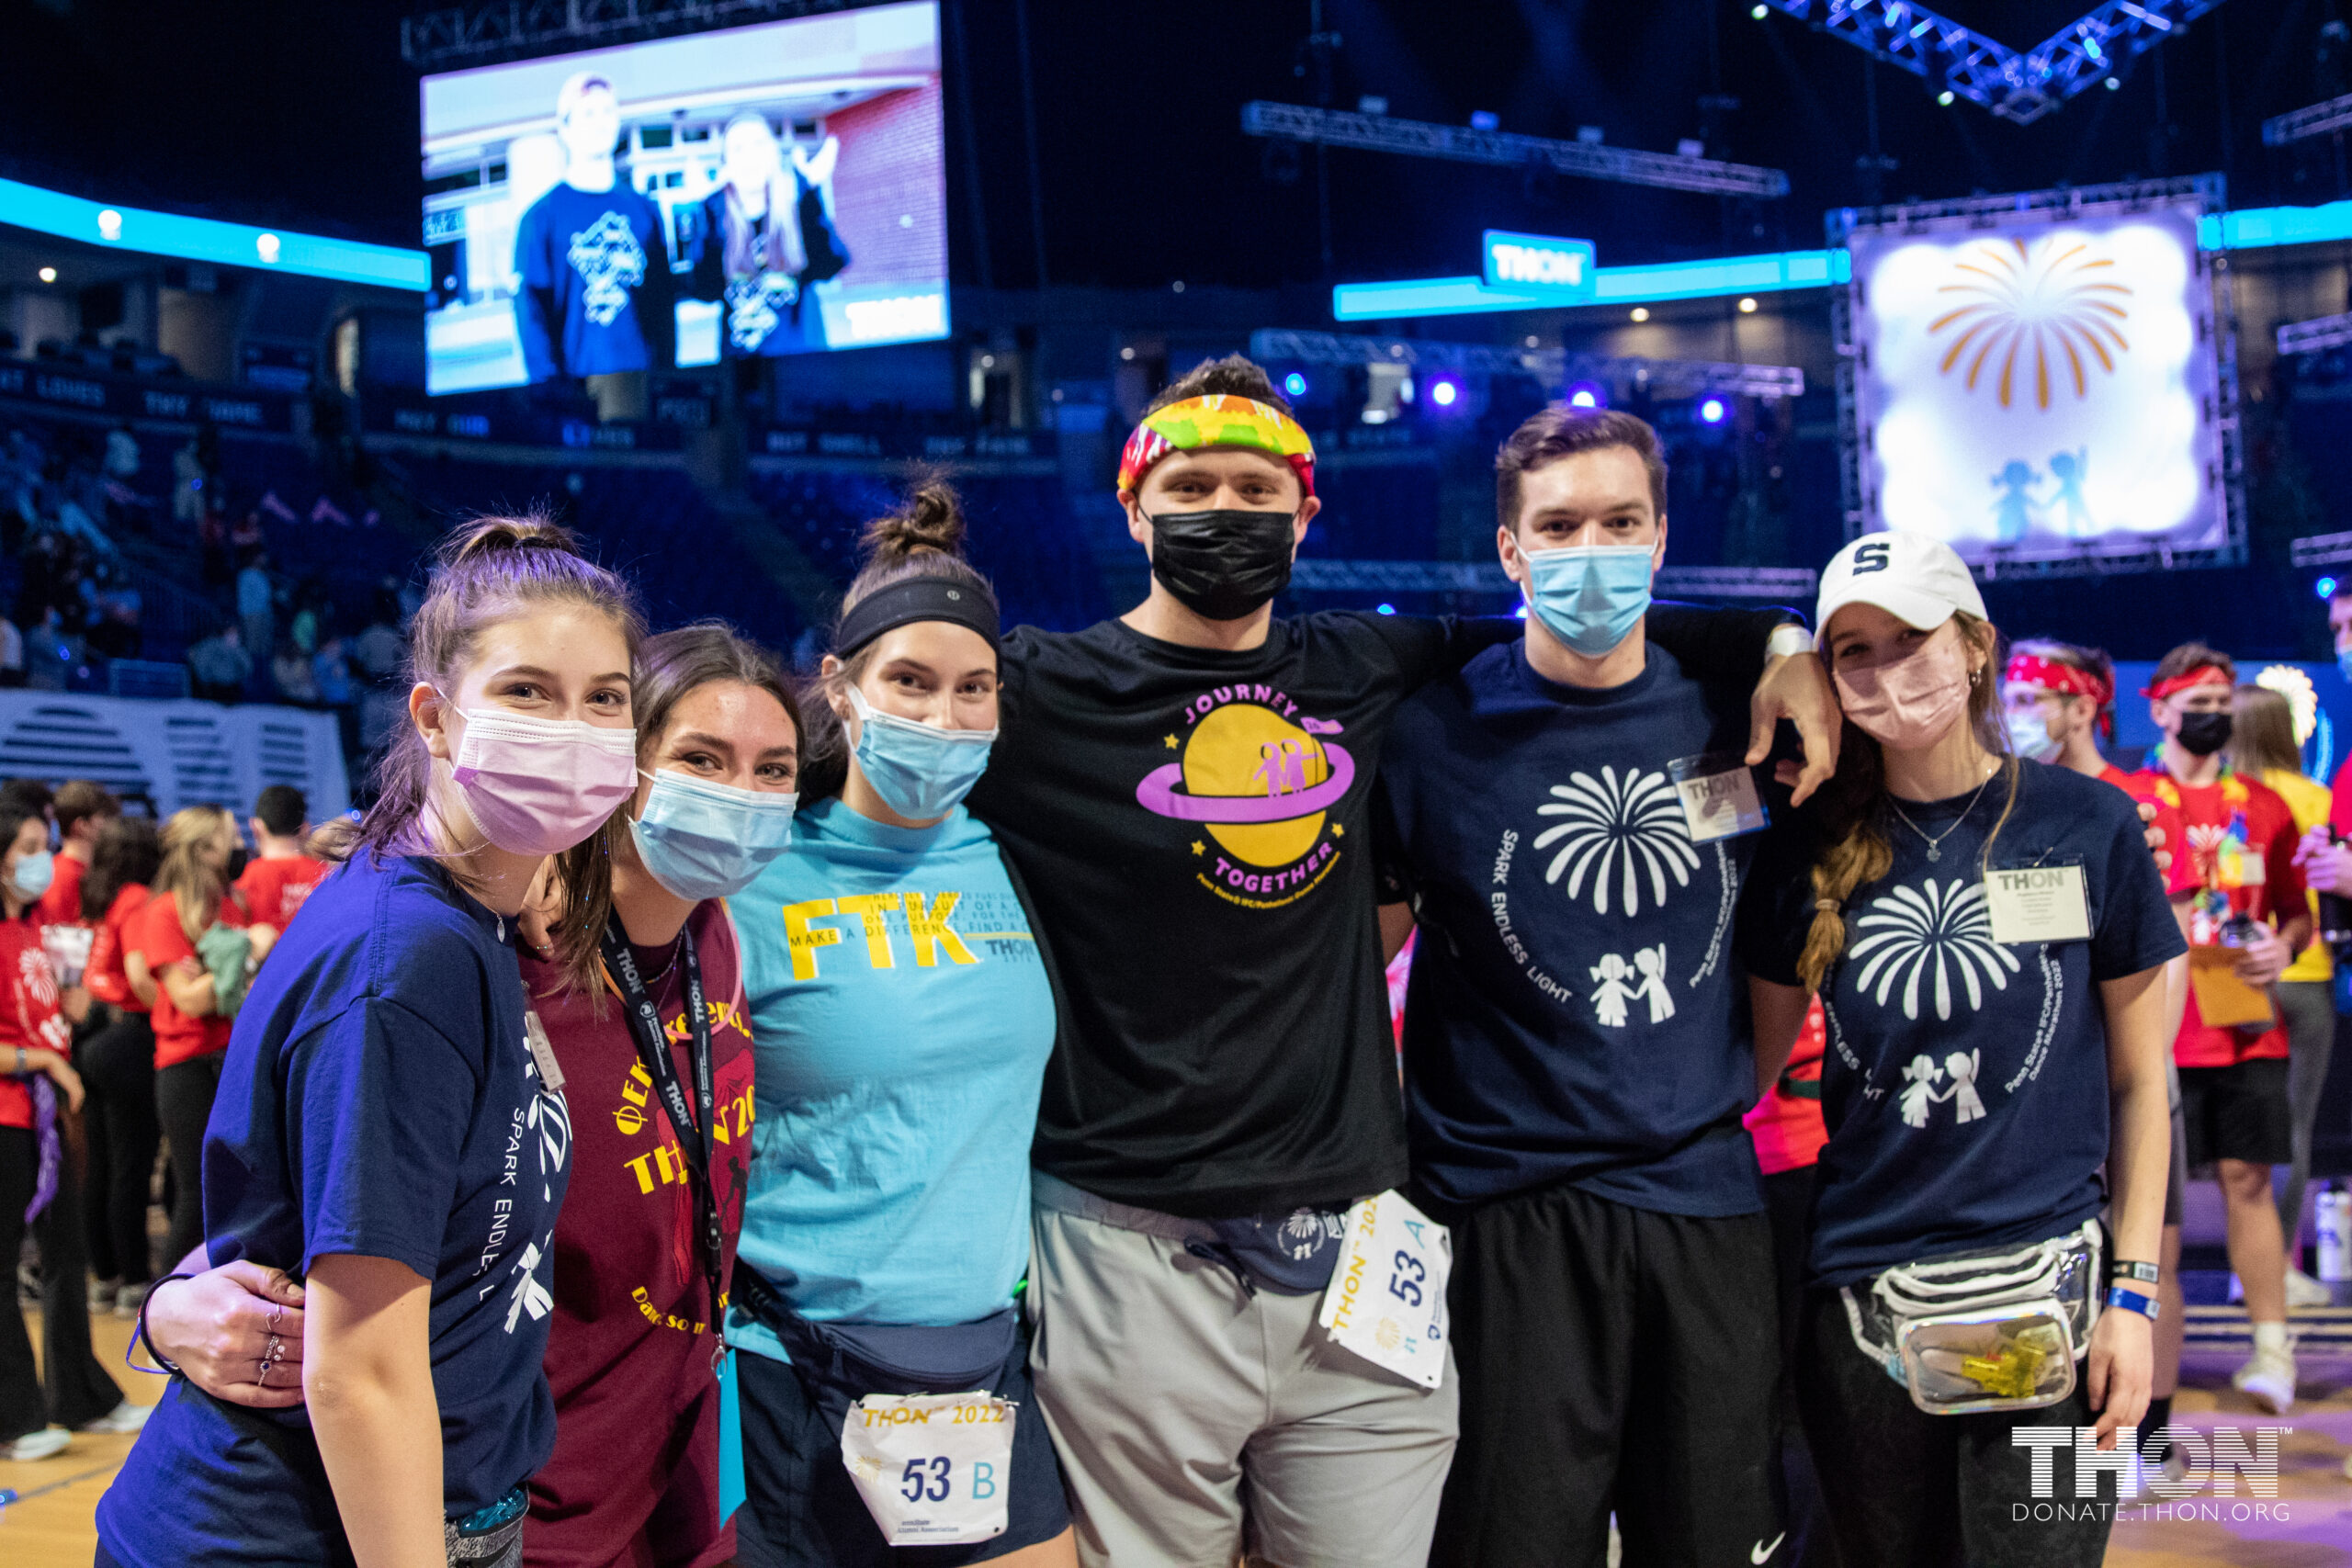 Dynamic Events Forged Relationship of Four Diamonds Fund and THON